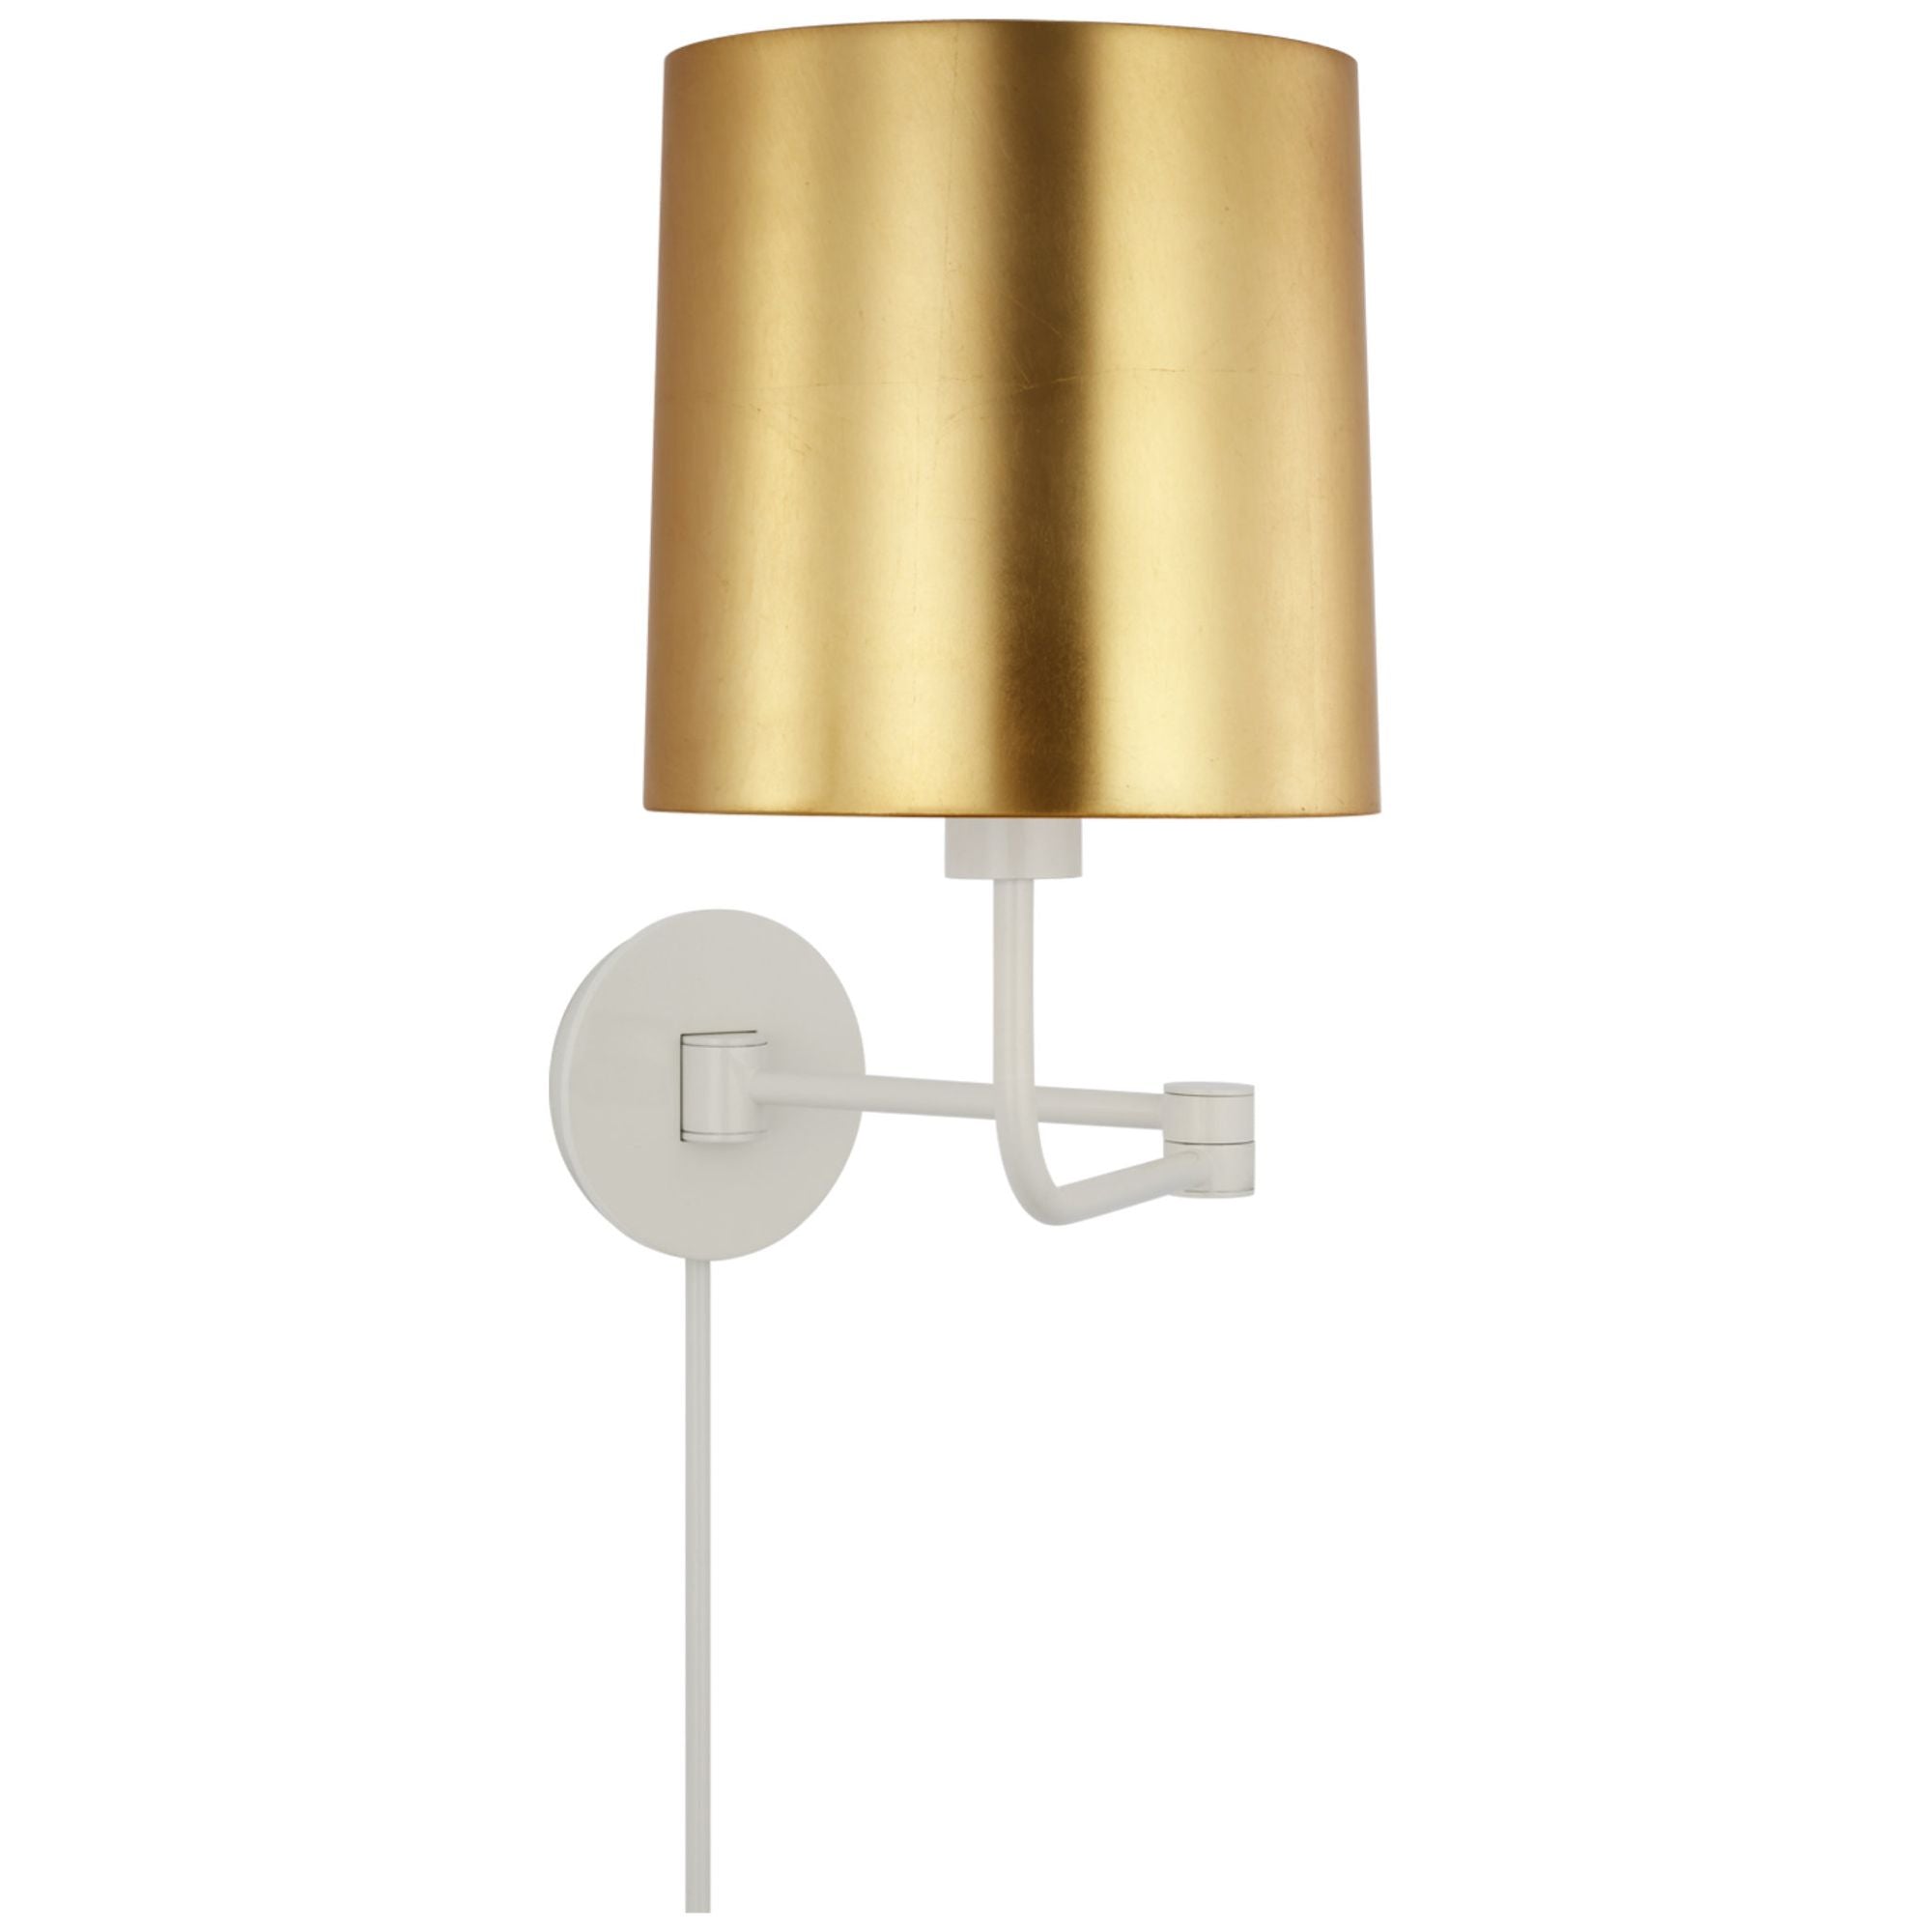 Barbara Barry Go Lightly Swing Arm Wall Light in China White with Gild Shade